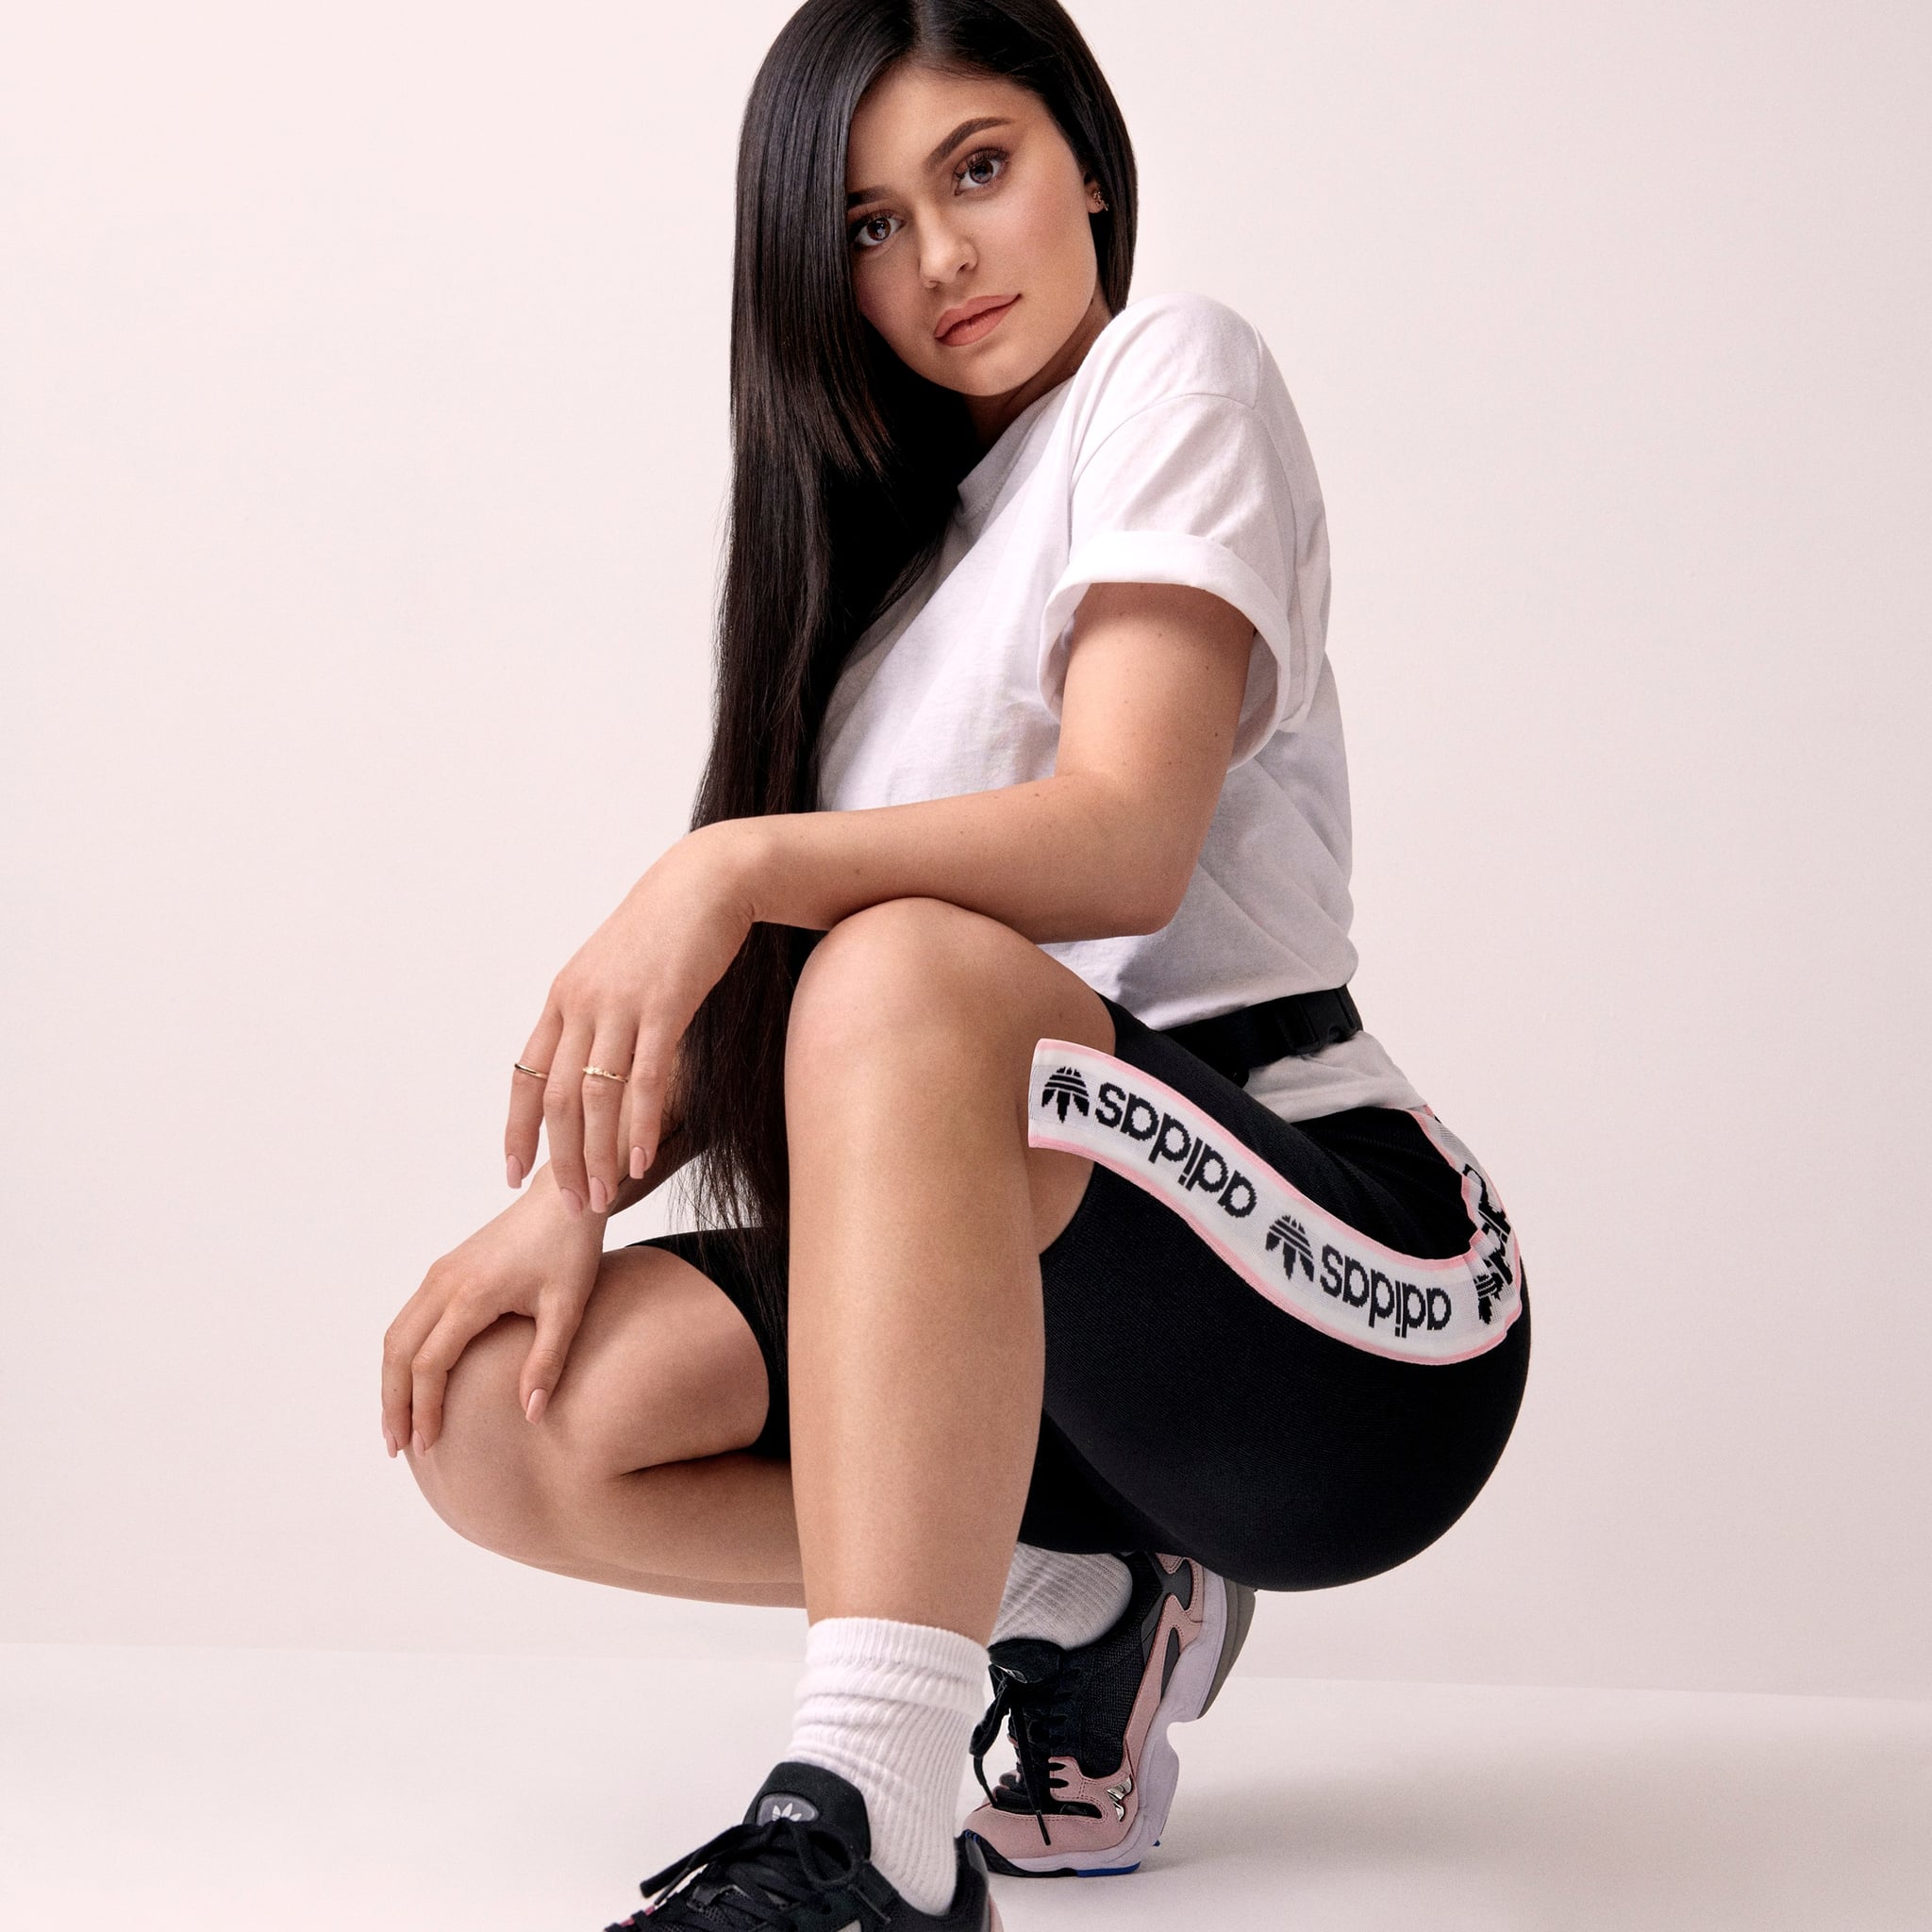 falcon adidas kylie jenner cheap online